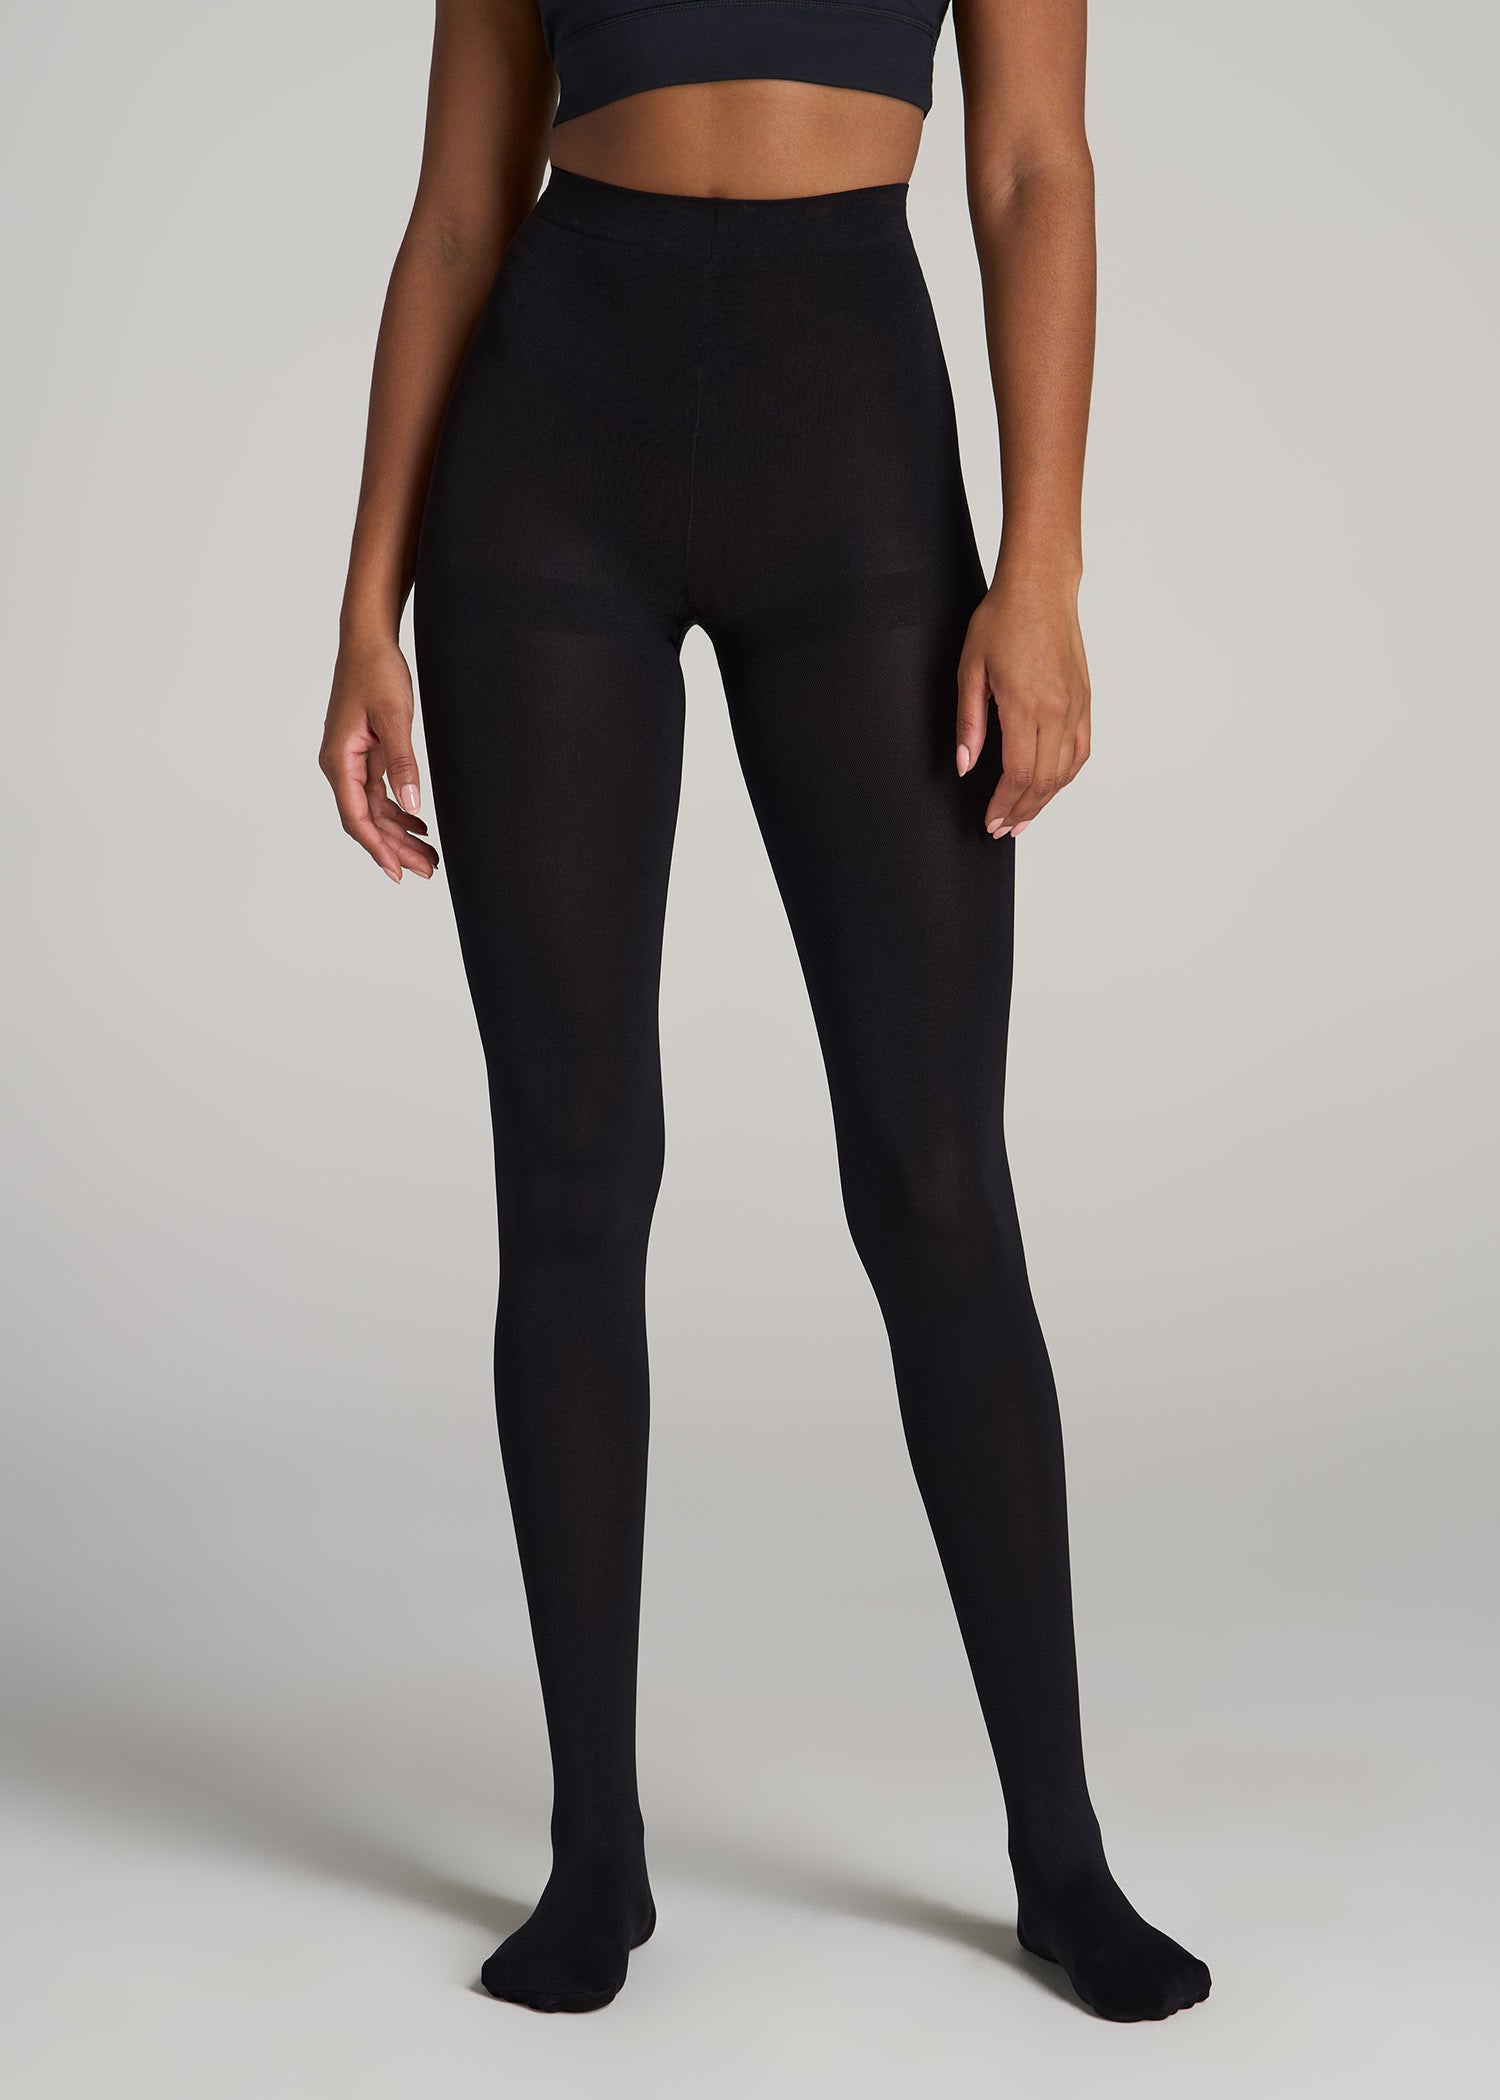 These Opaque Tights Are an  Bestseller